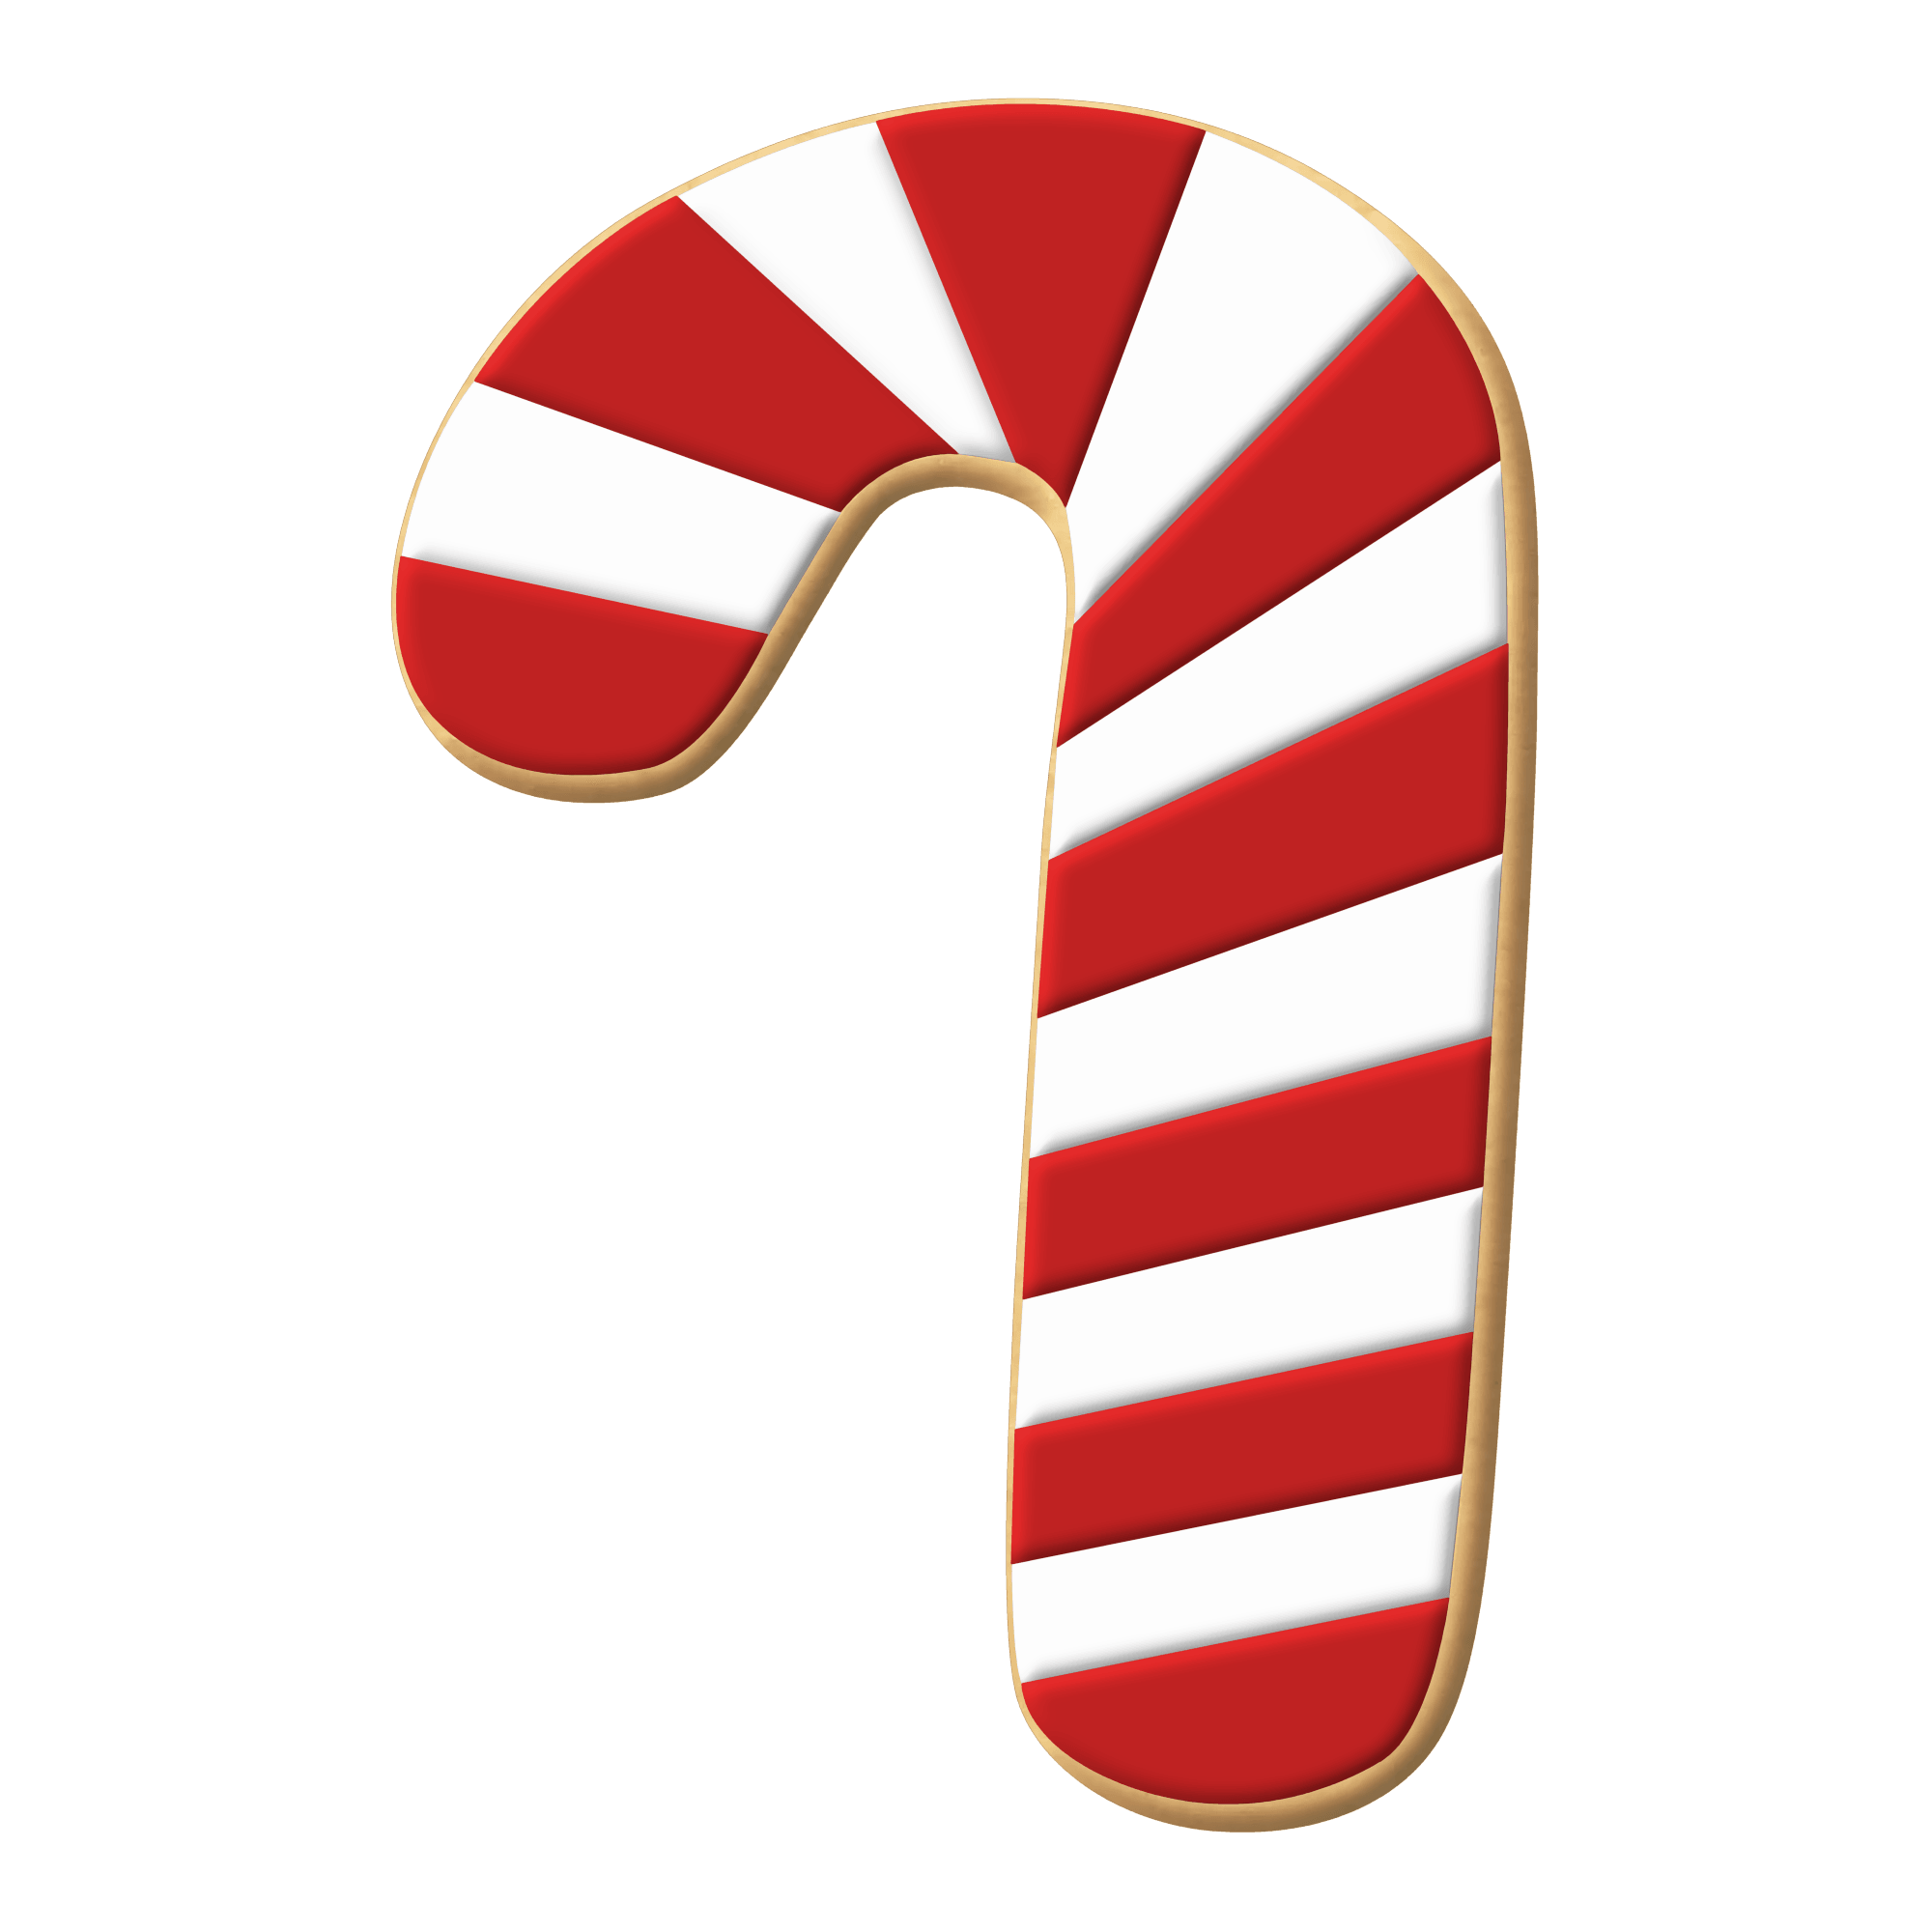 CANDY CANE COOKIE CUTTER - Cake Decorating Central